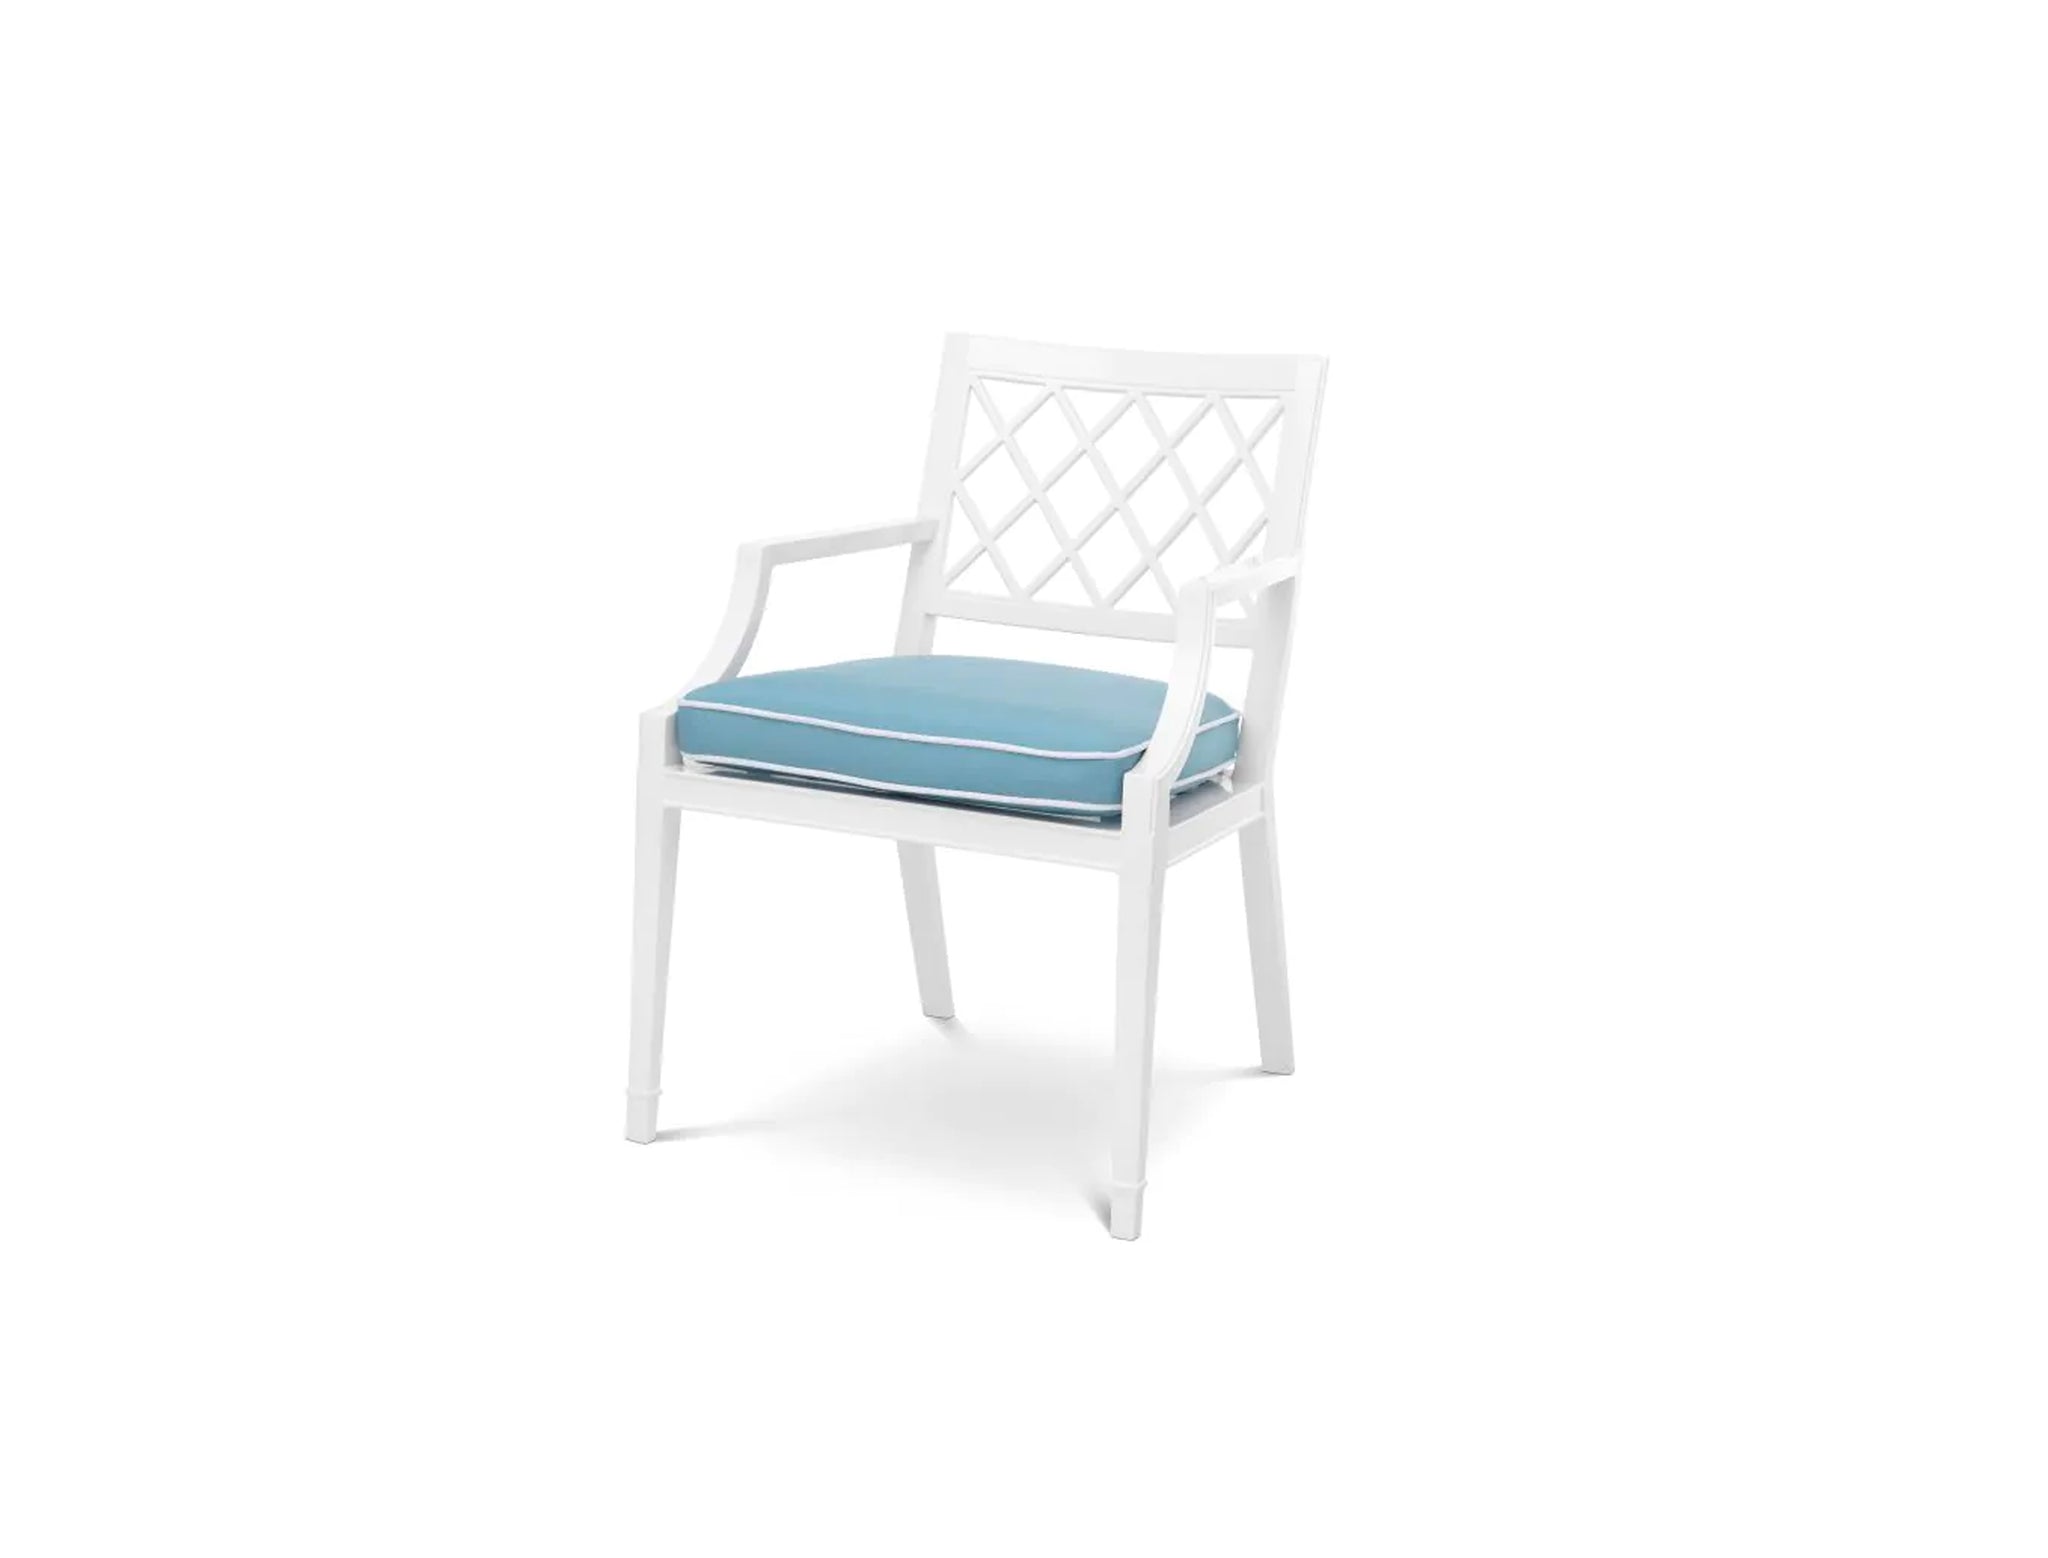 Bell Rive Outdoor Dining Chair With Arm